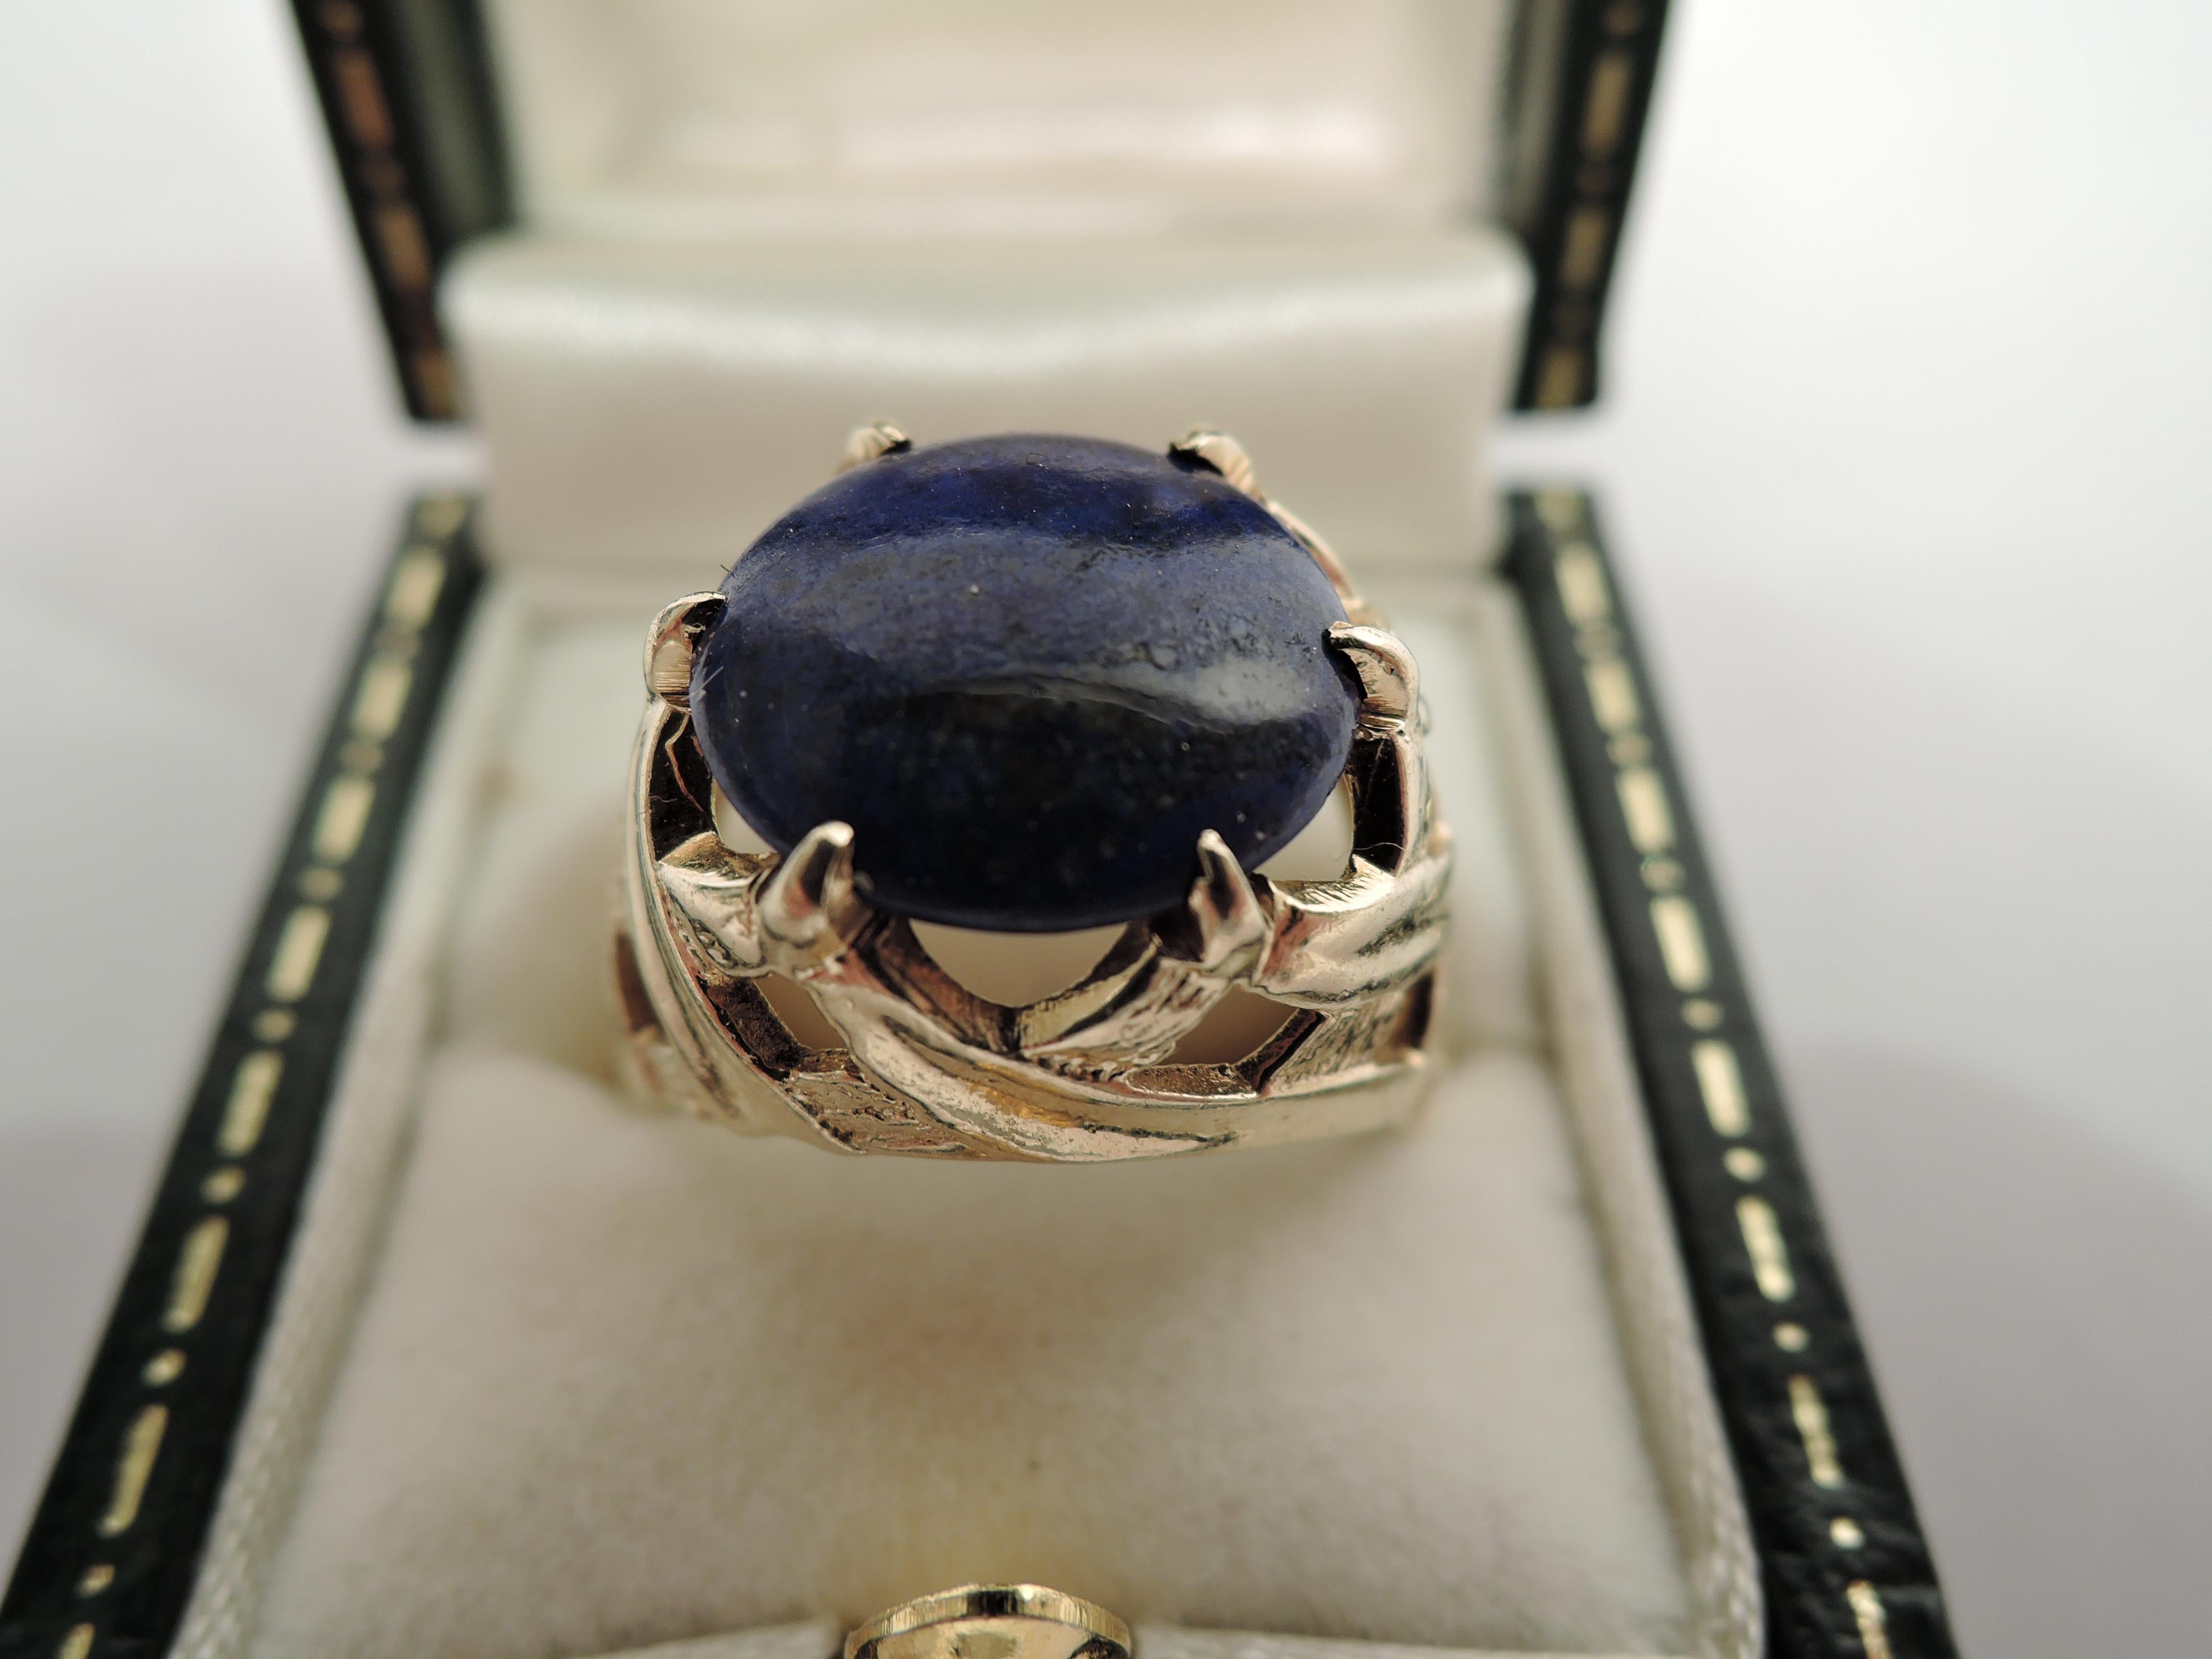 Handsome ring with round lapis mounted to 14k yellow gold band with open woven shoulder. United States, ca 1950.
Size: 7. Approximate weight: 3.8 dwt.